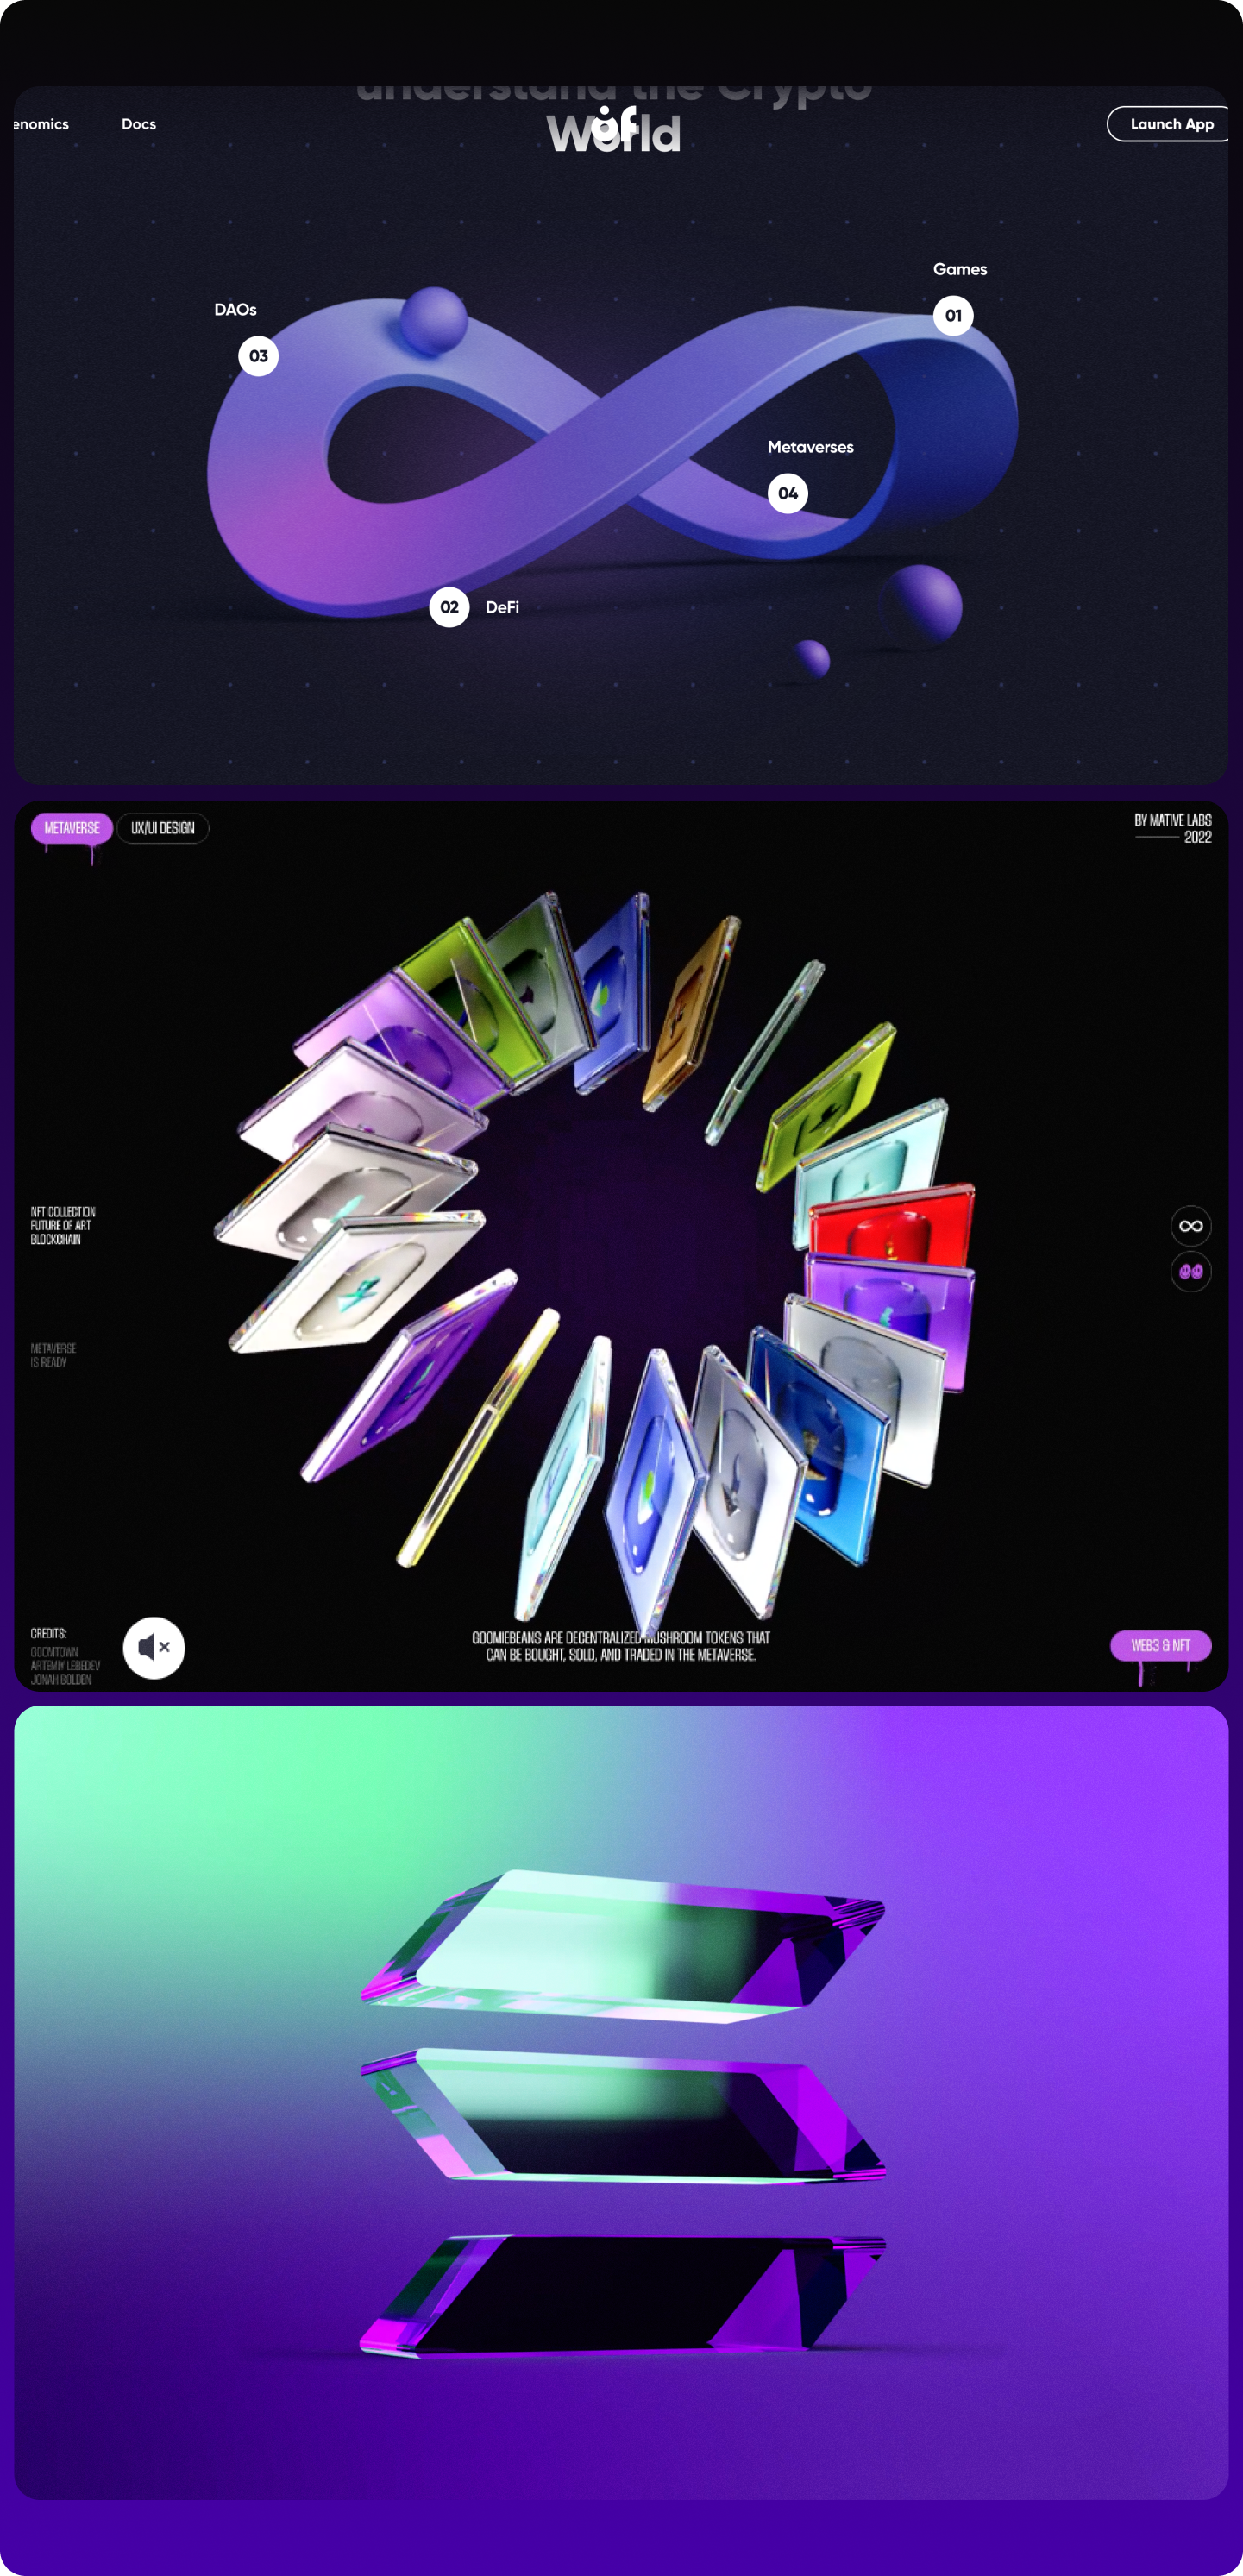 Board with screenshots of web3 services that use neon colors, abstract shapes and sci-fi-looking graphics